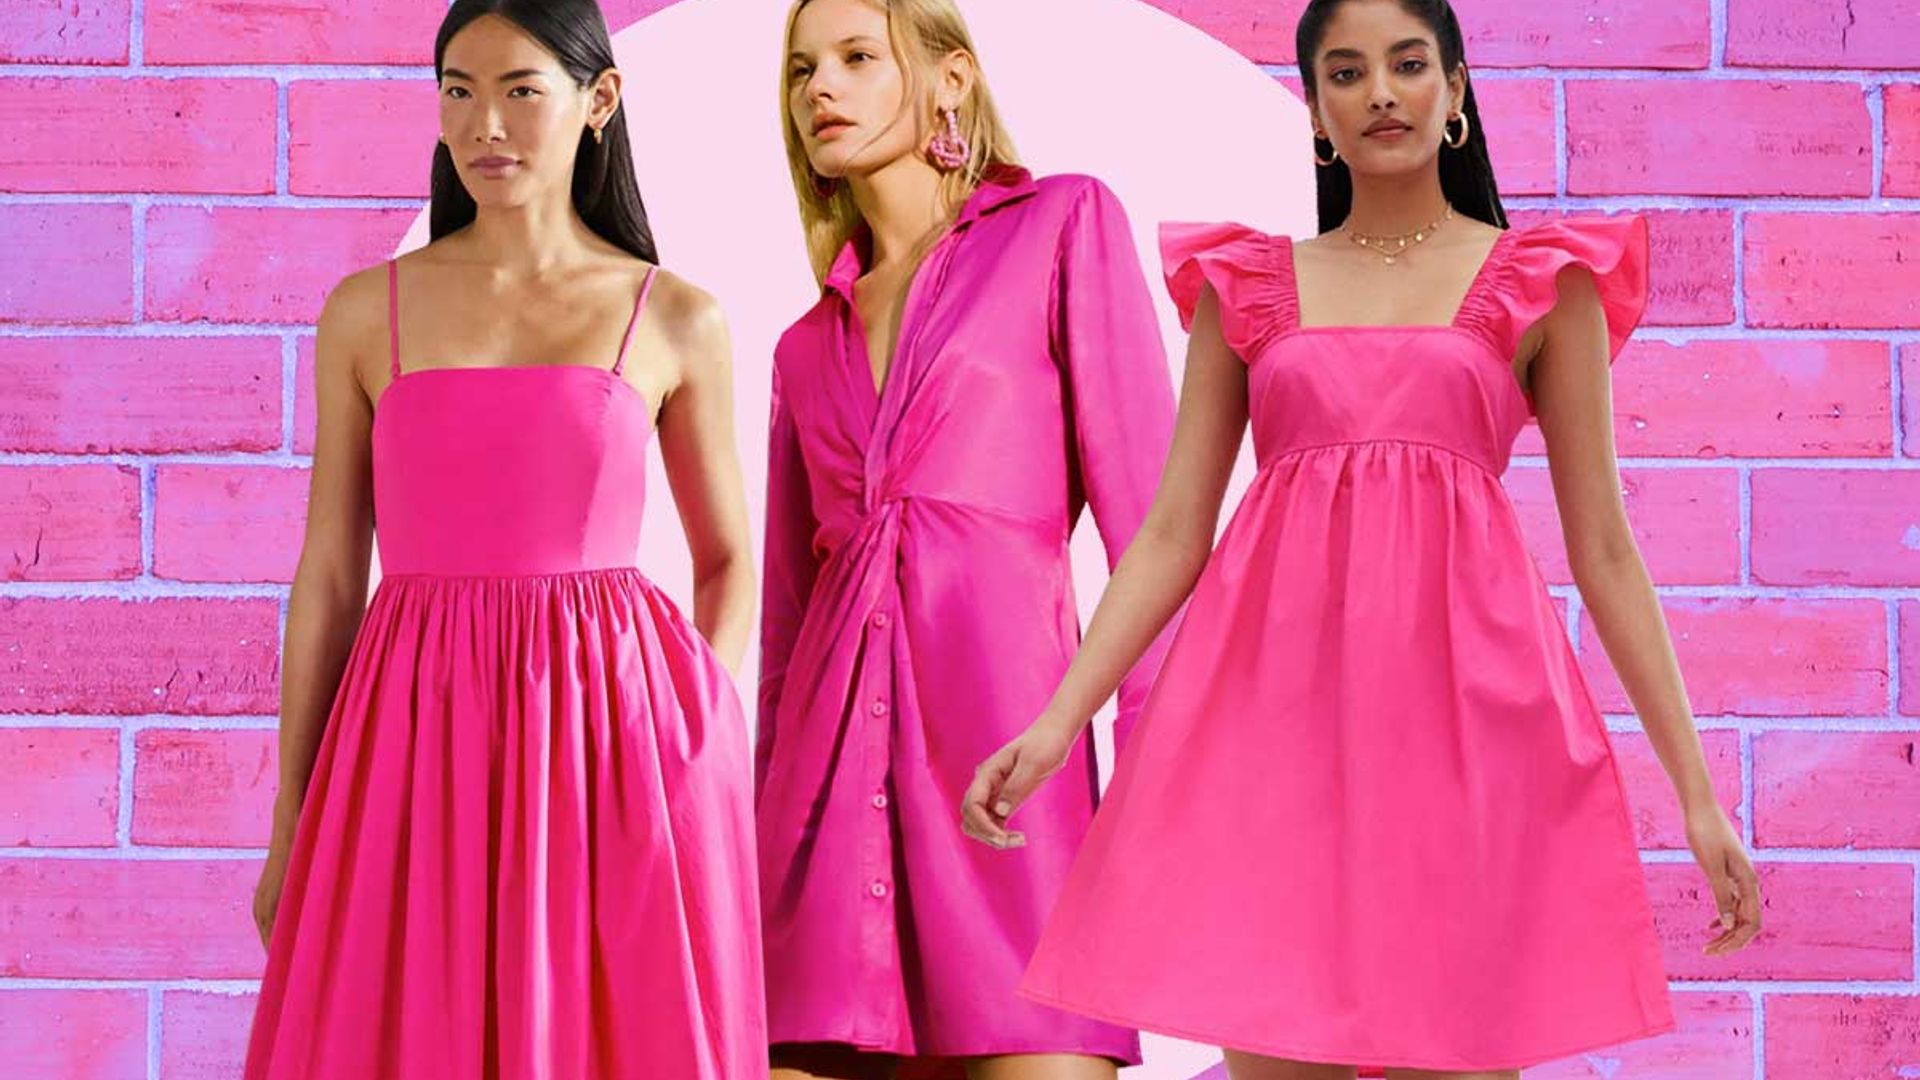 Best pink dresses for women for summer 2022: From Zara to ASOS, M&S & MORE